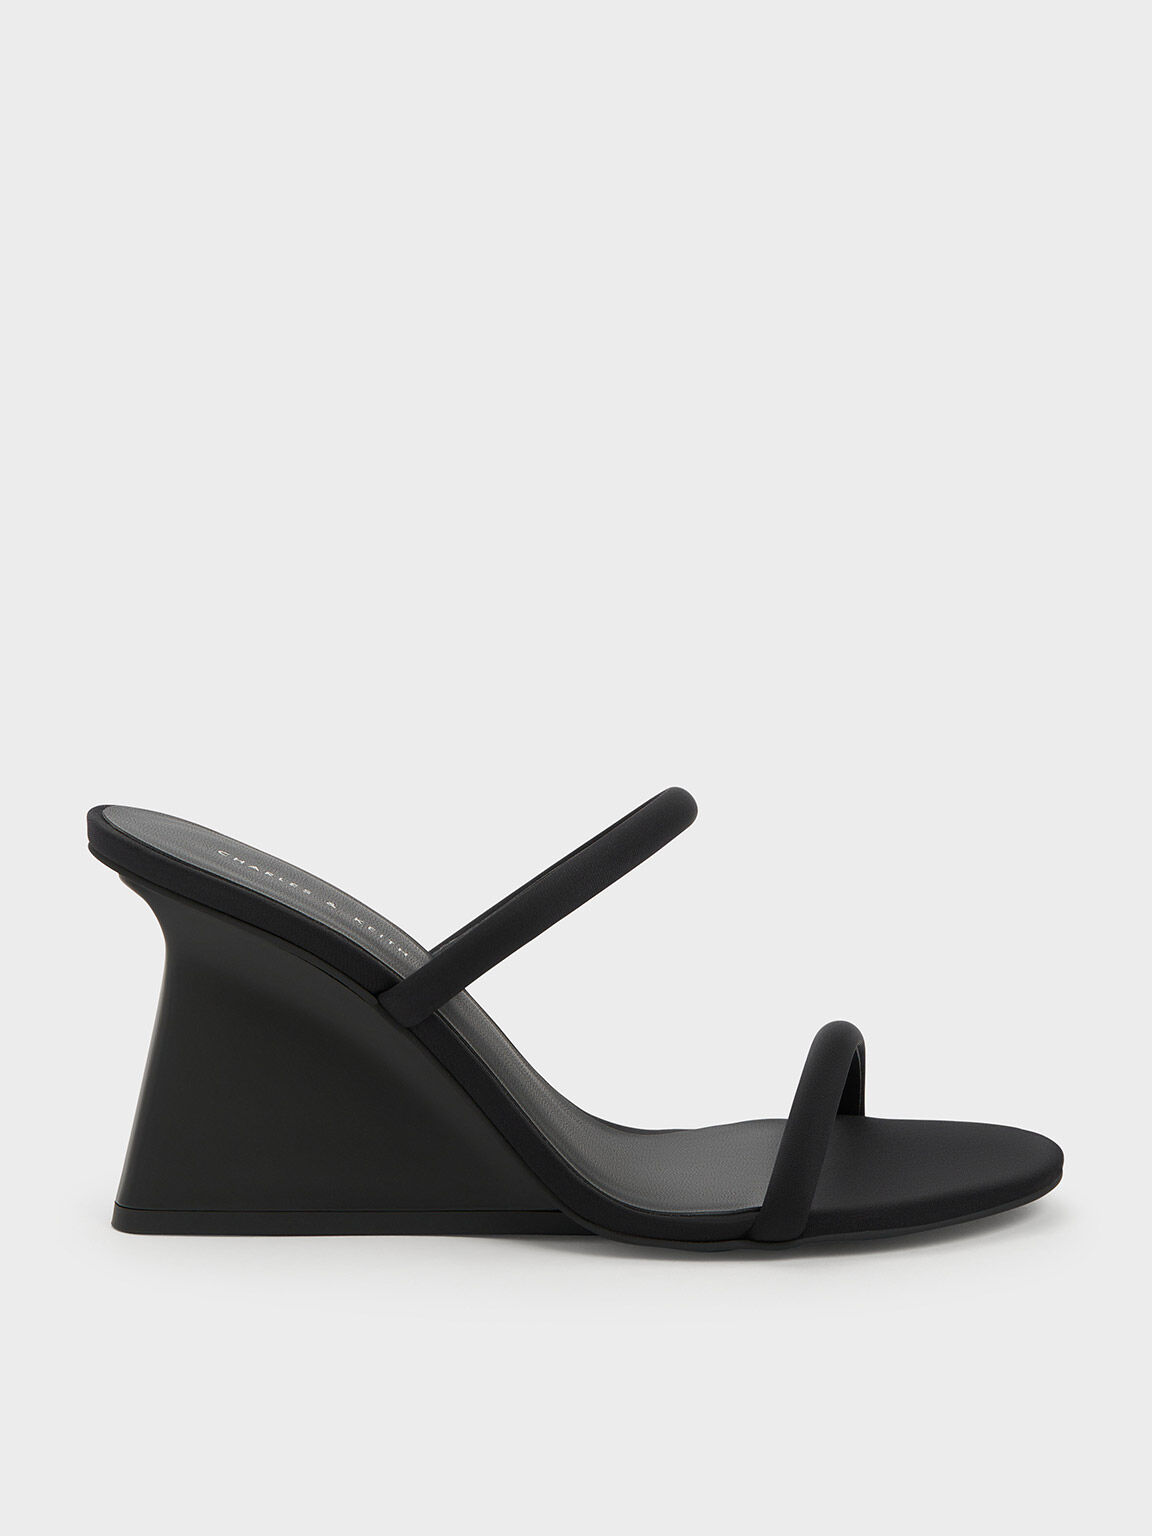 Black Textured Double Strap Wedge Mules - CHARLES & KEITH KW